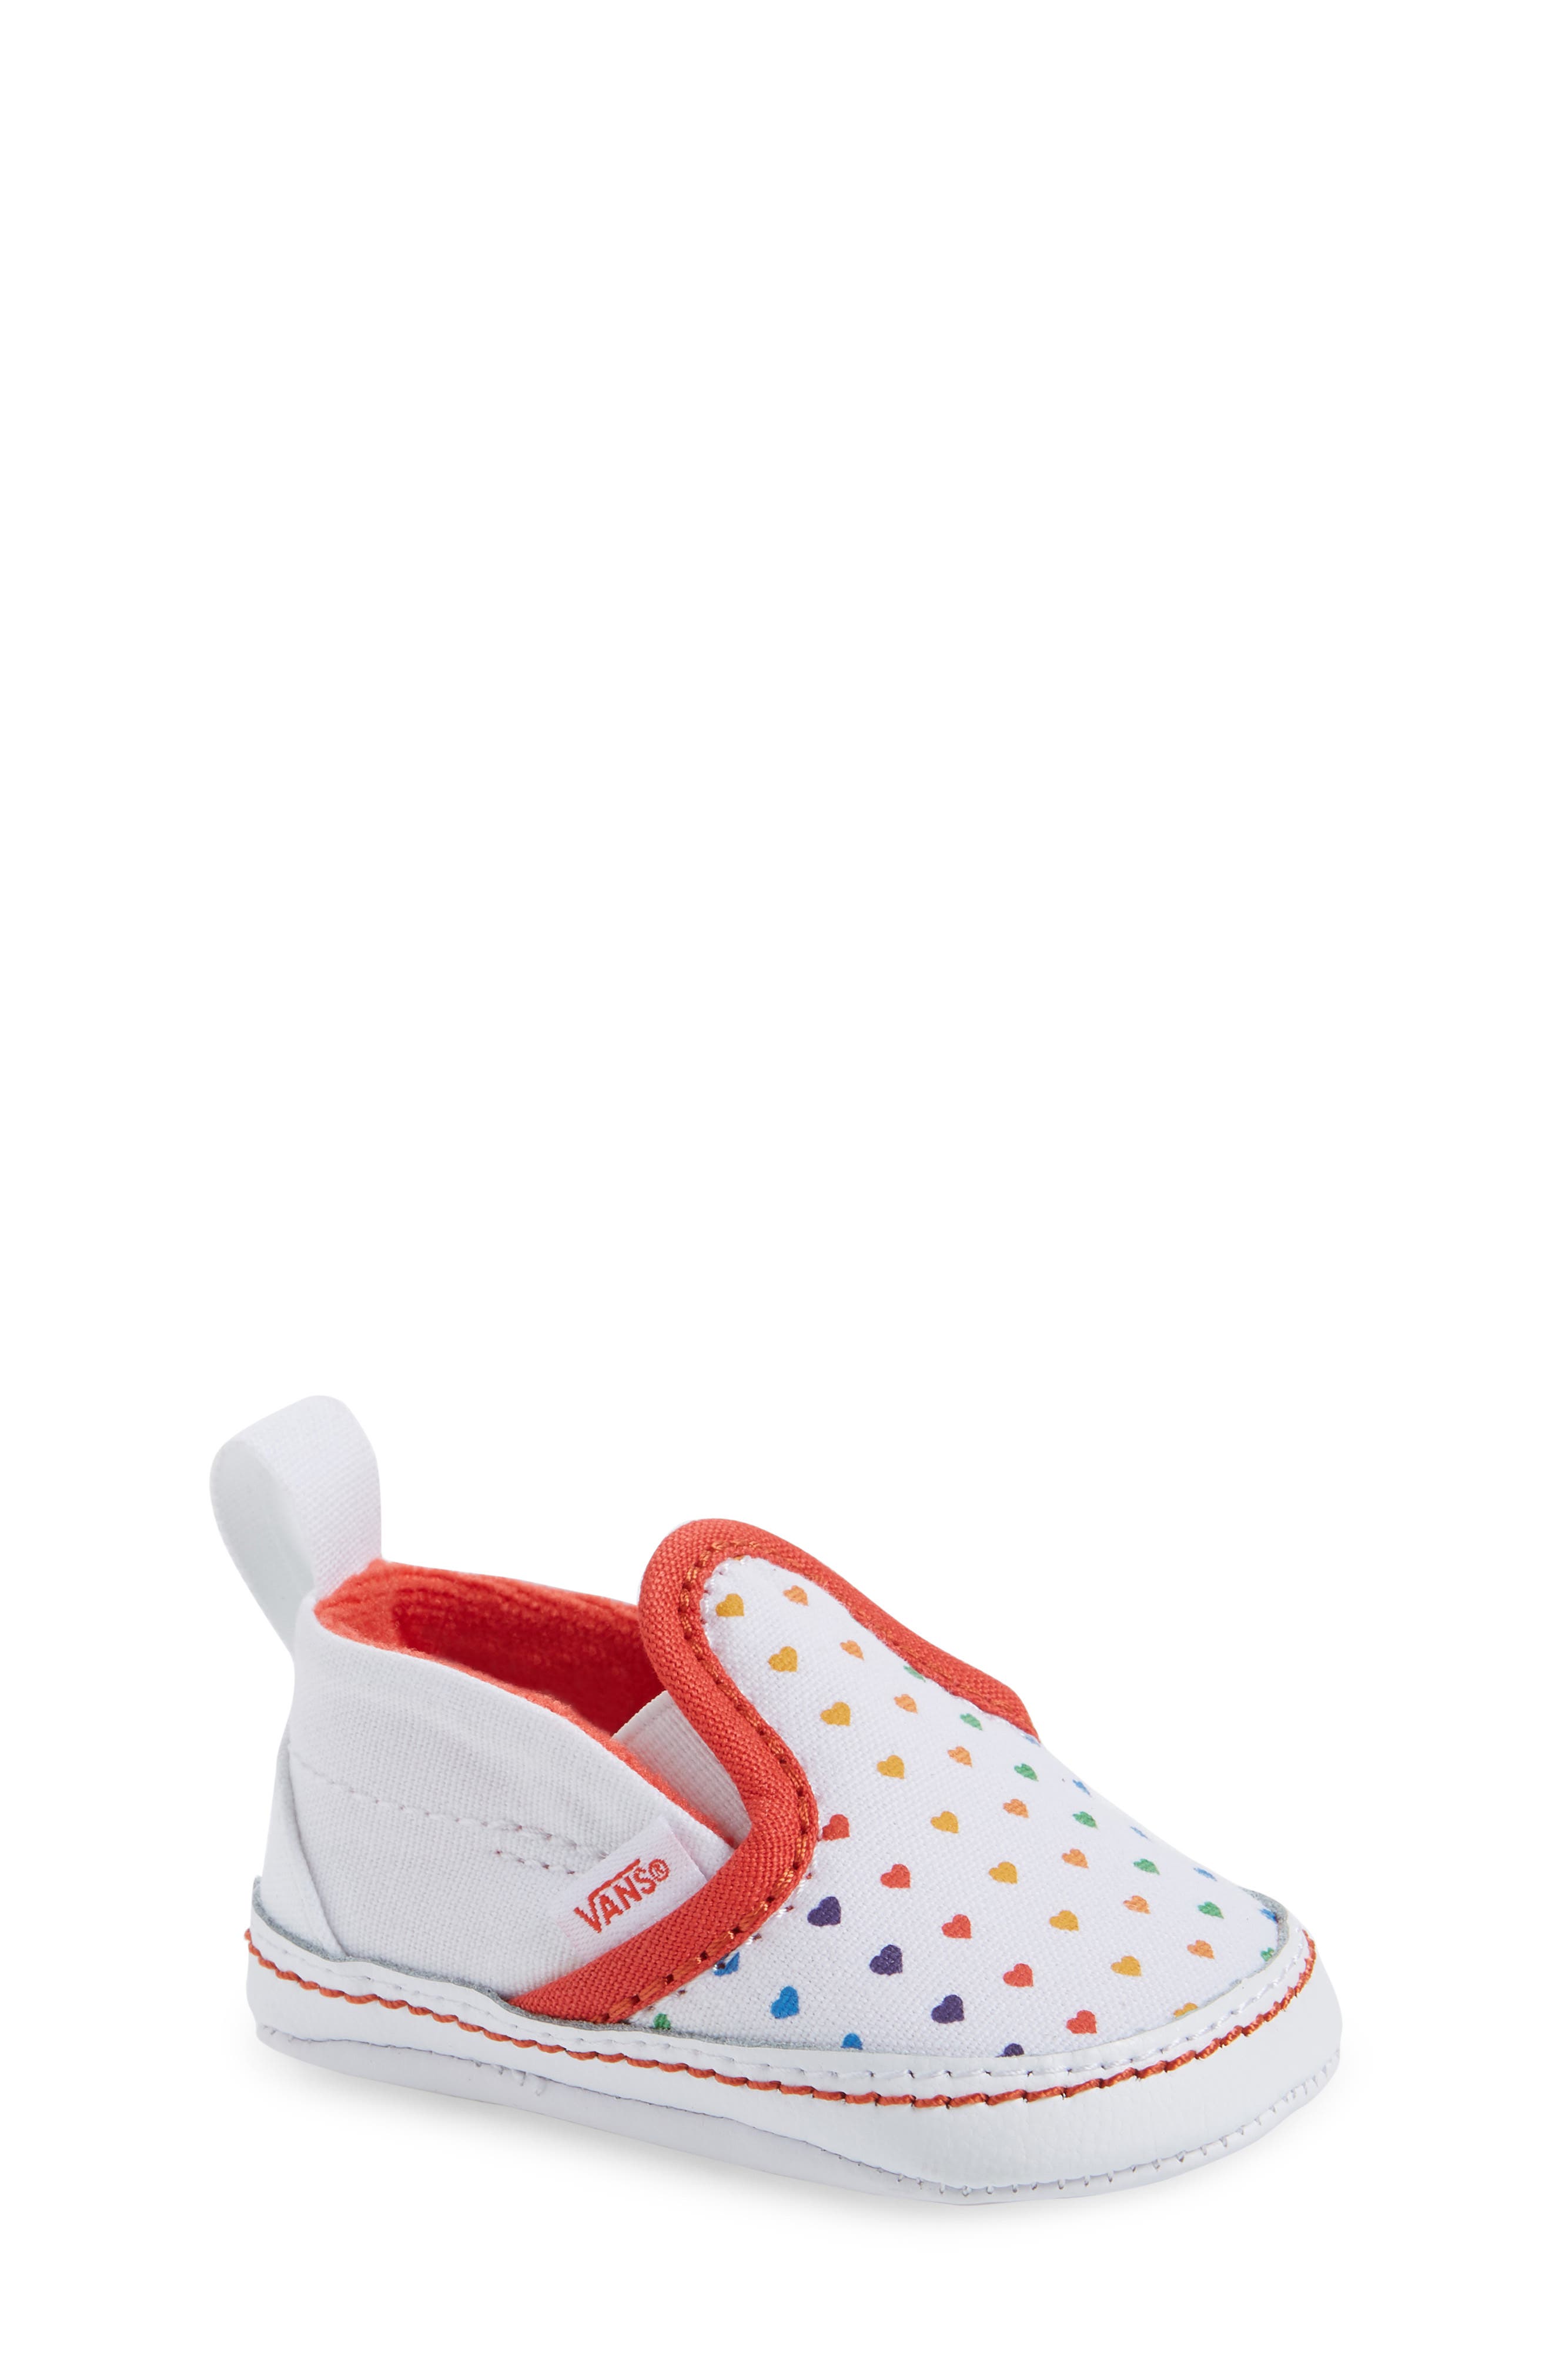 Baby Girl Crib Shoes Sale | Nordstrom